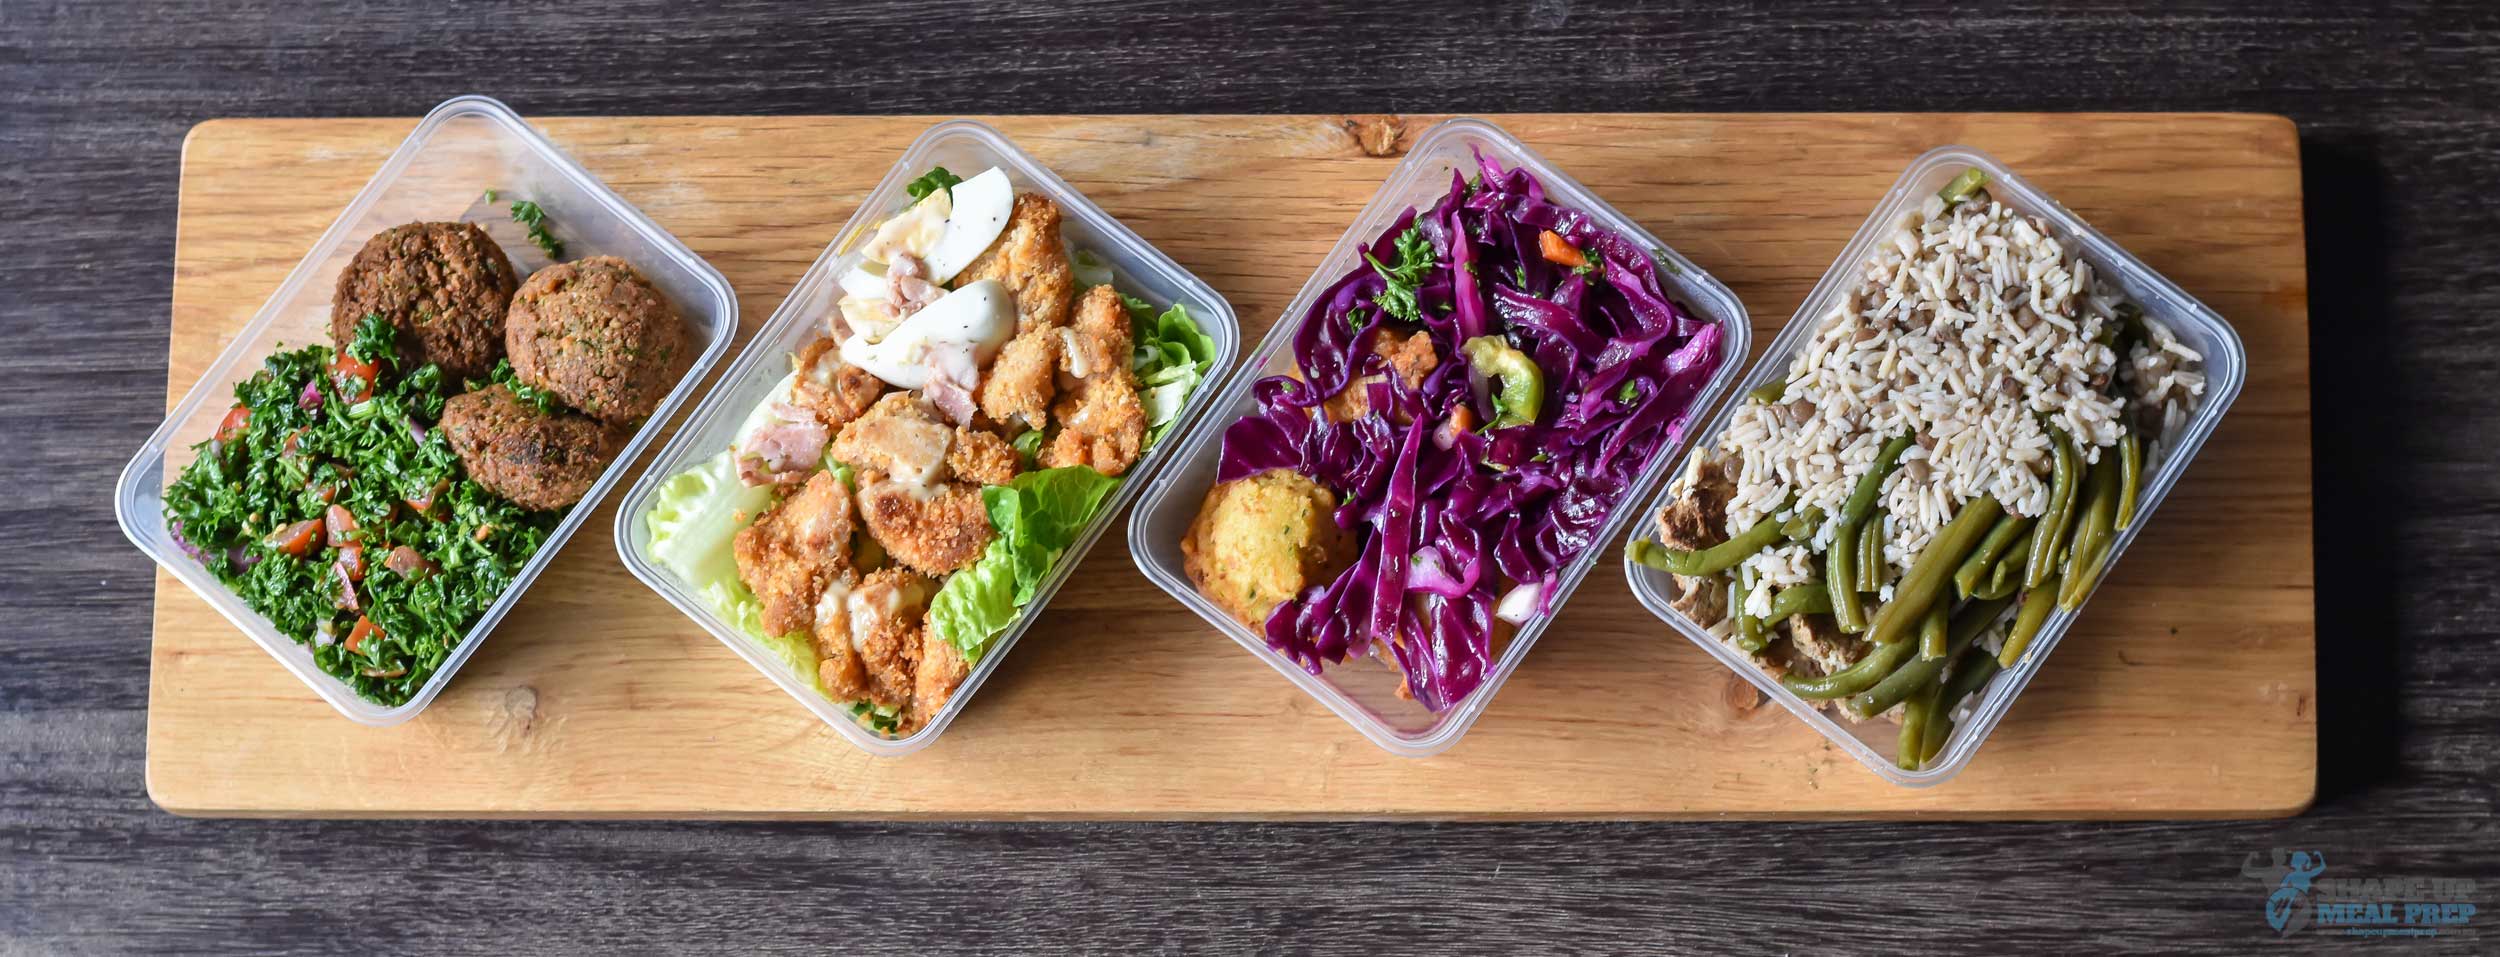 Four select meals from Shape Up Meal Prep